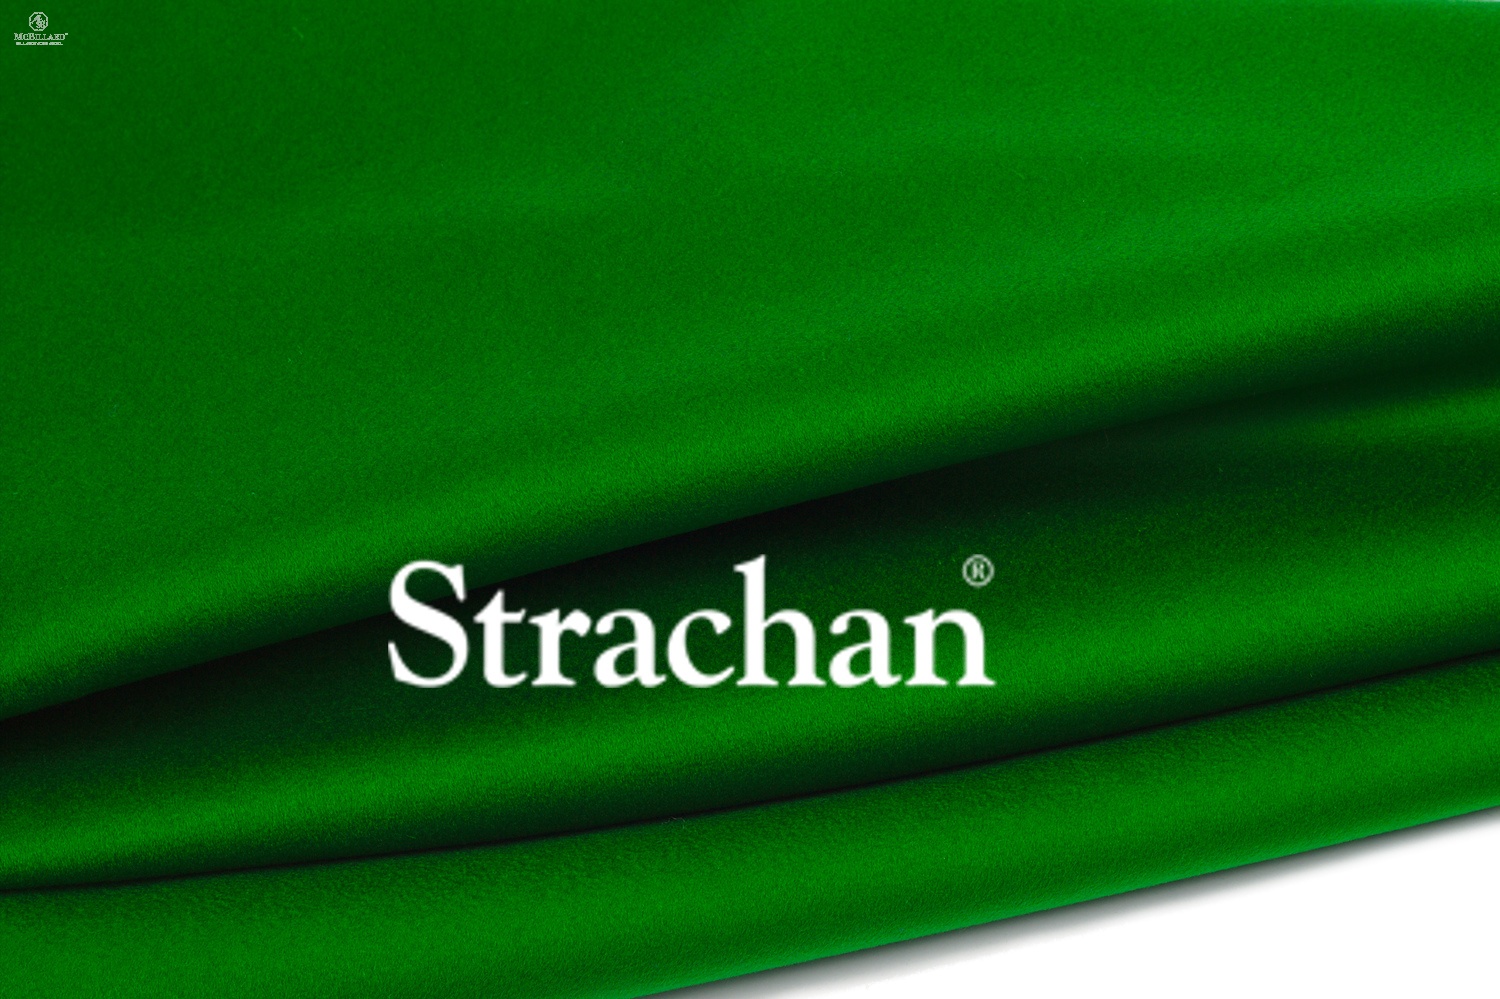  Strachan - Snooker cloth West of England - 6811 Tournament 30 oz - Snooker